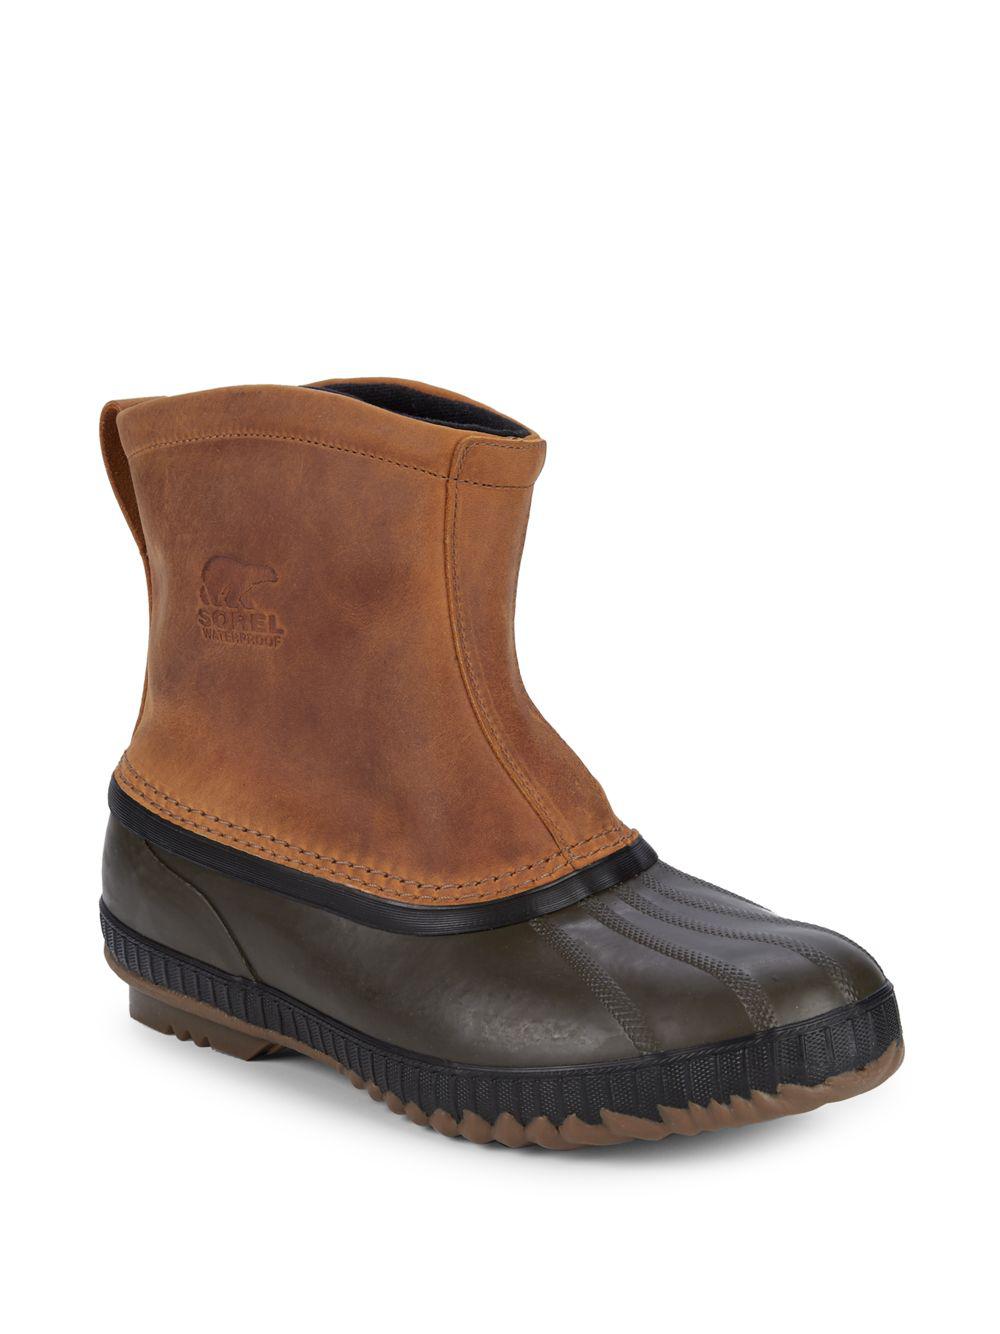 Sorel Leather Textured Ankle Boots in 